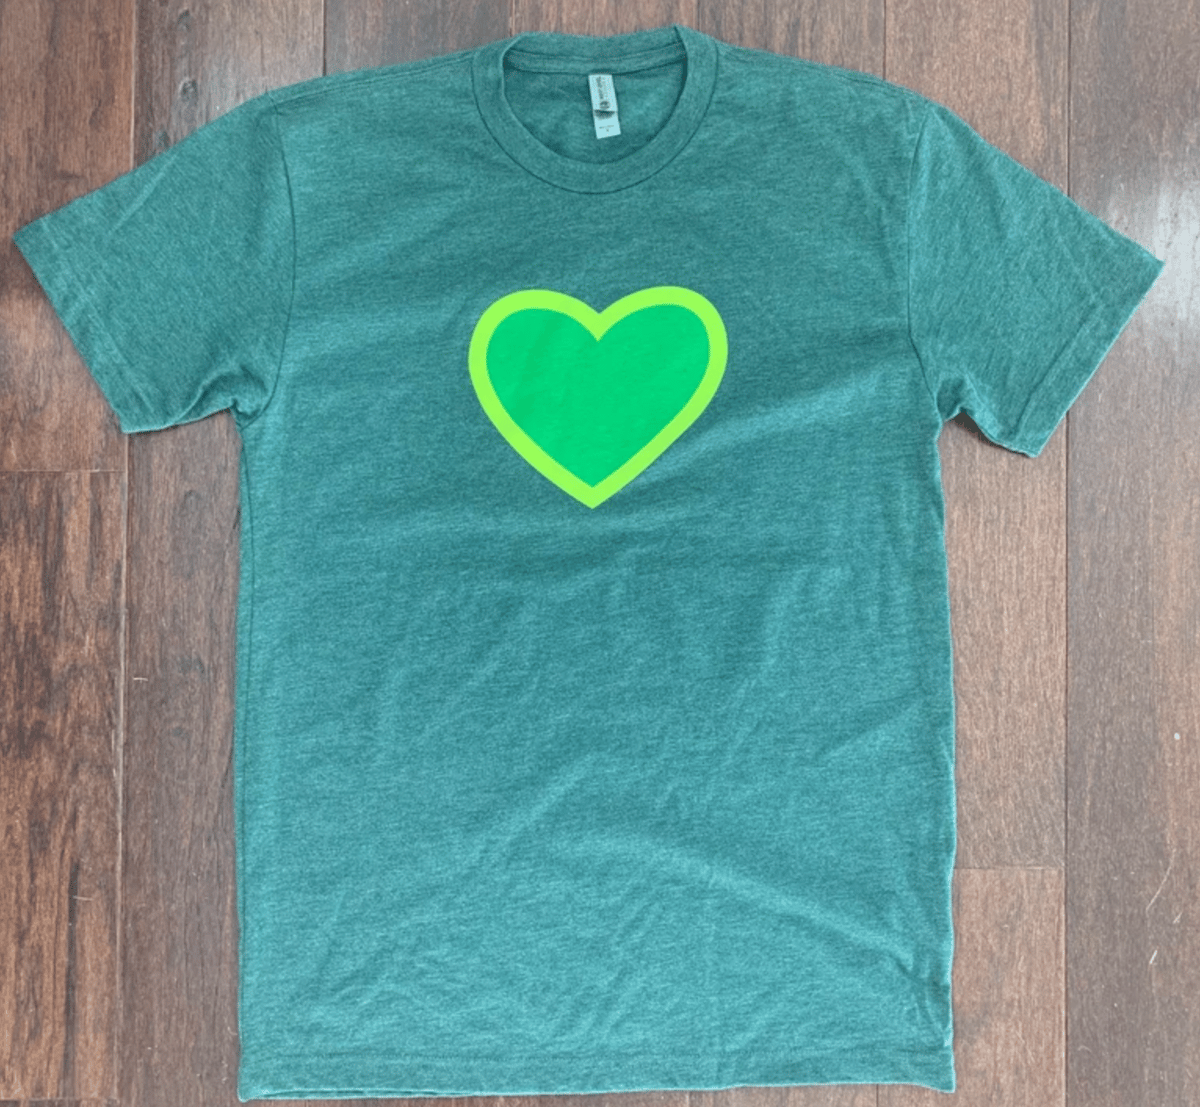 Image of Unisex Green Heart Tee in Forest Green